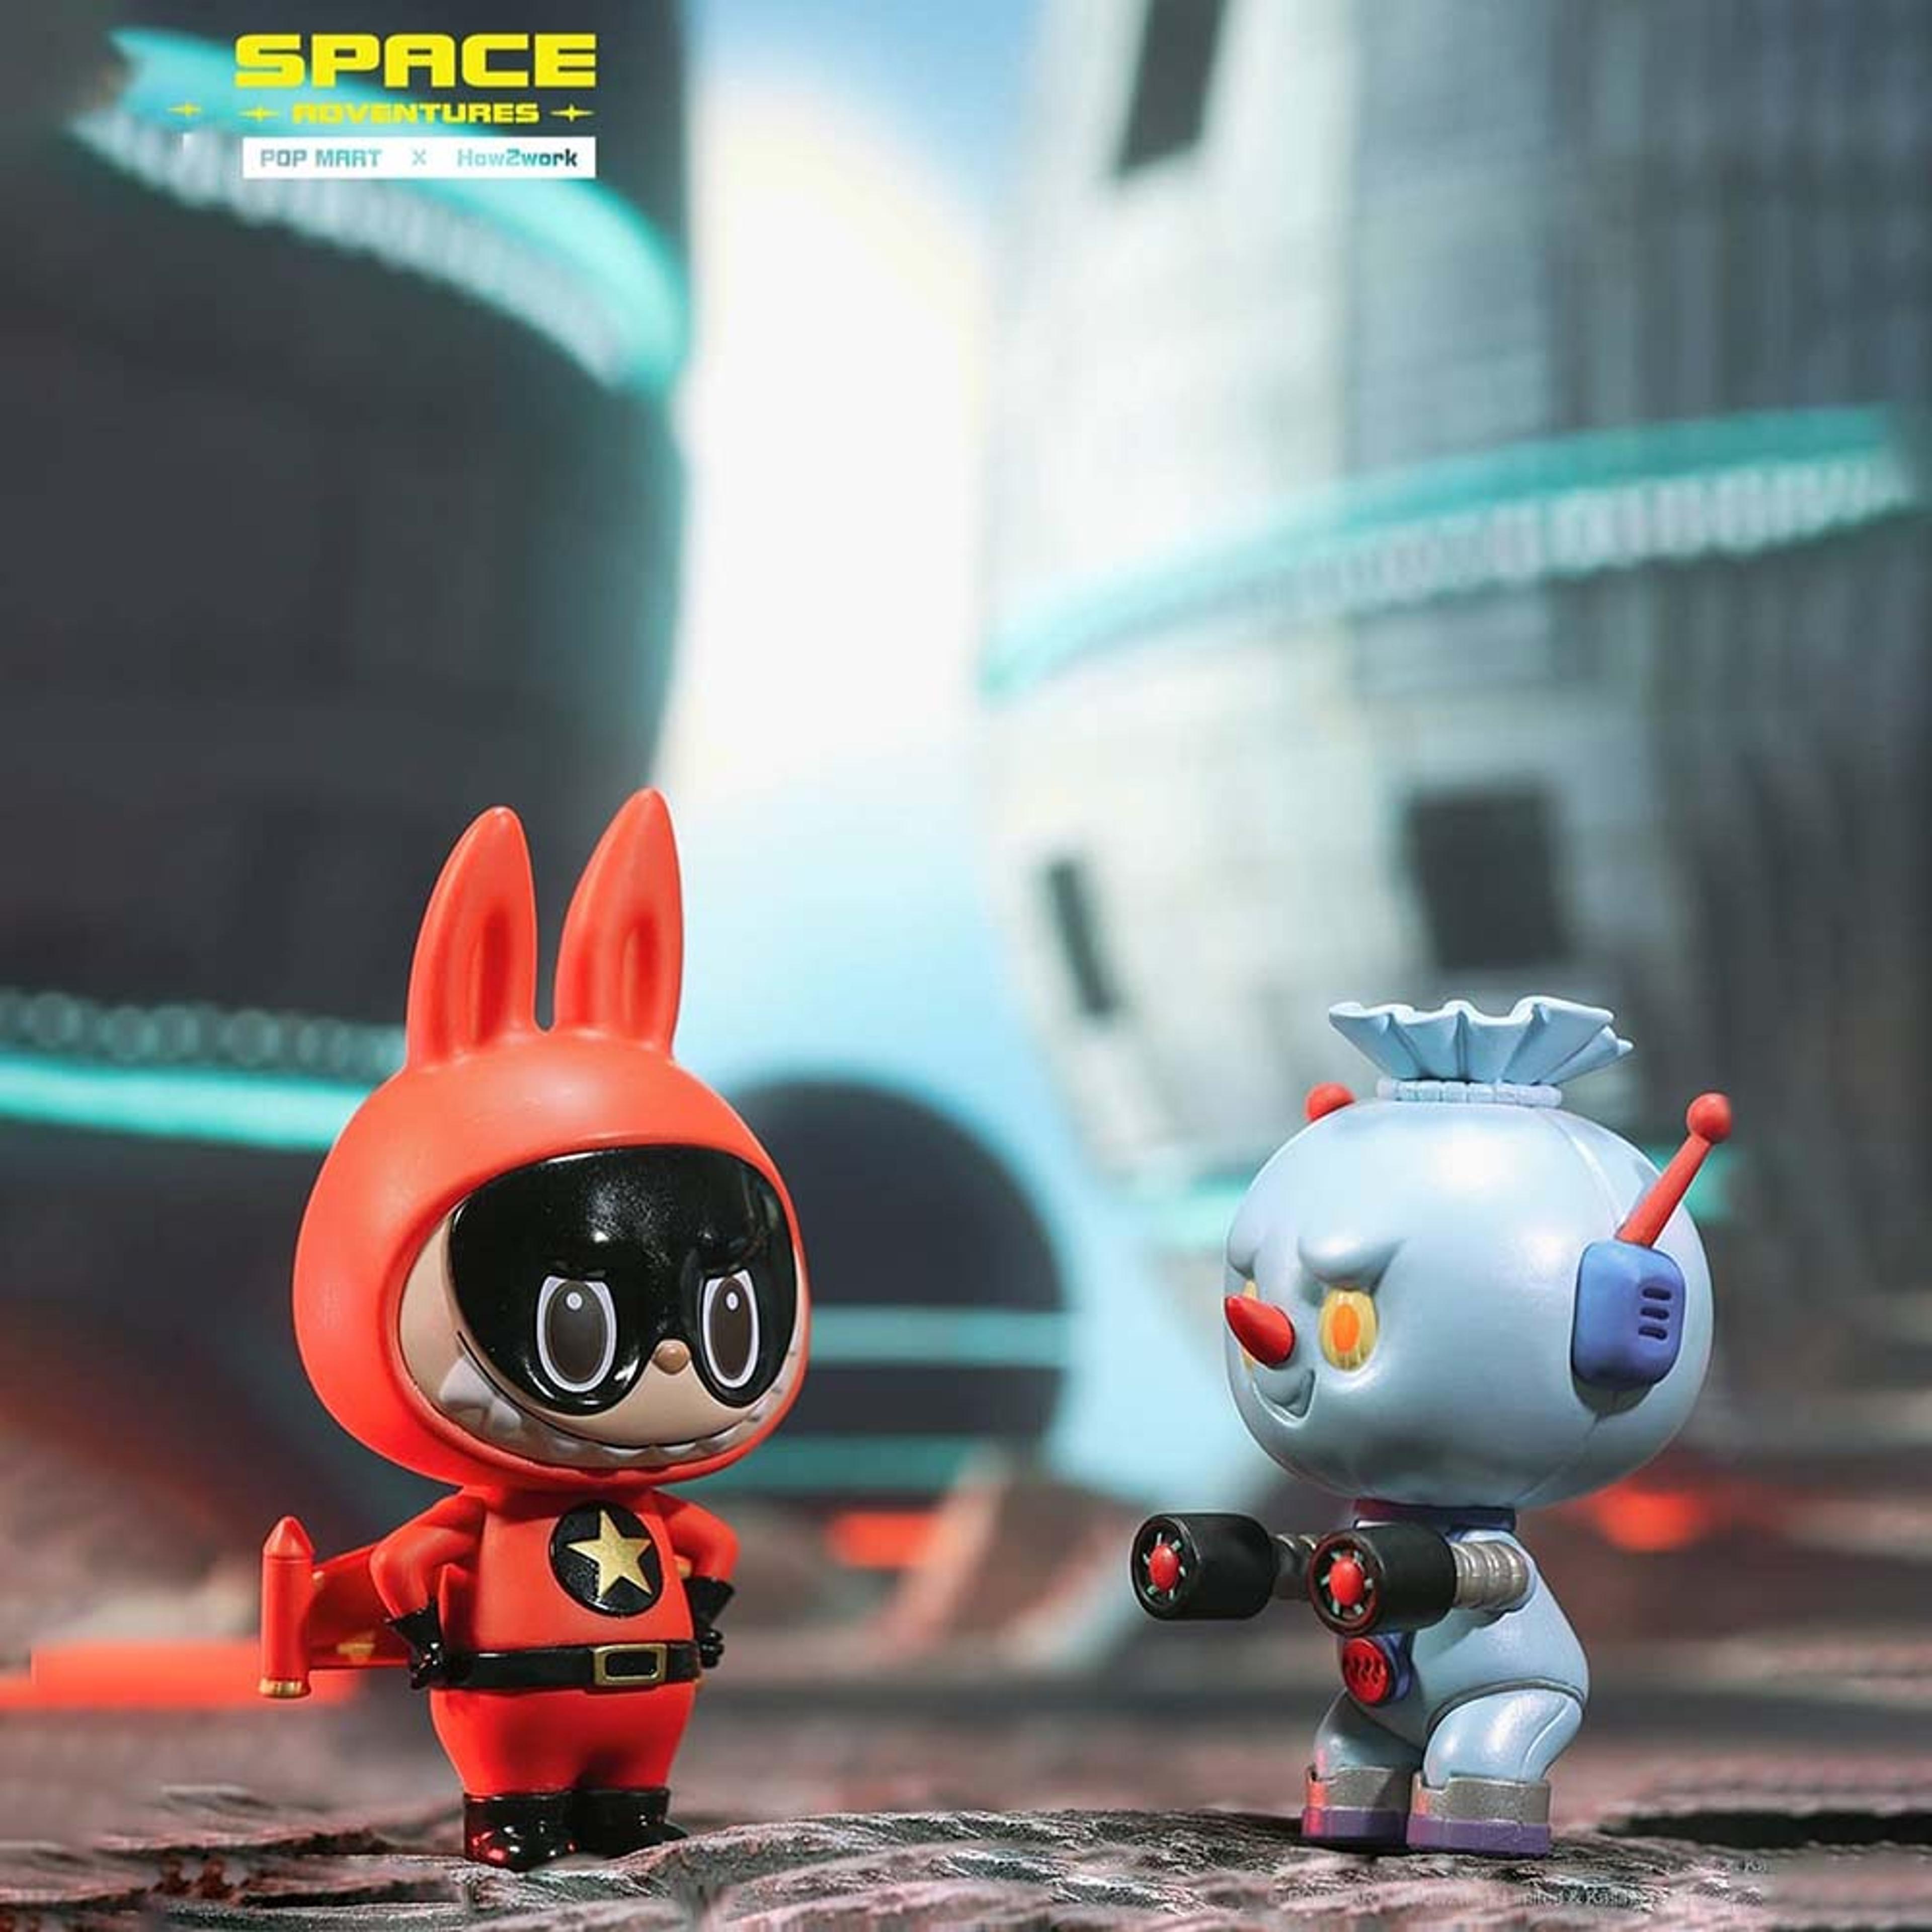 Alternate View 4 of The Monsters Space Adventures Blind Box Series by Kasing Lung x 